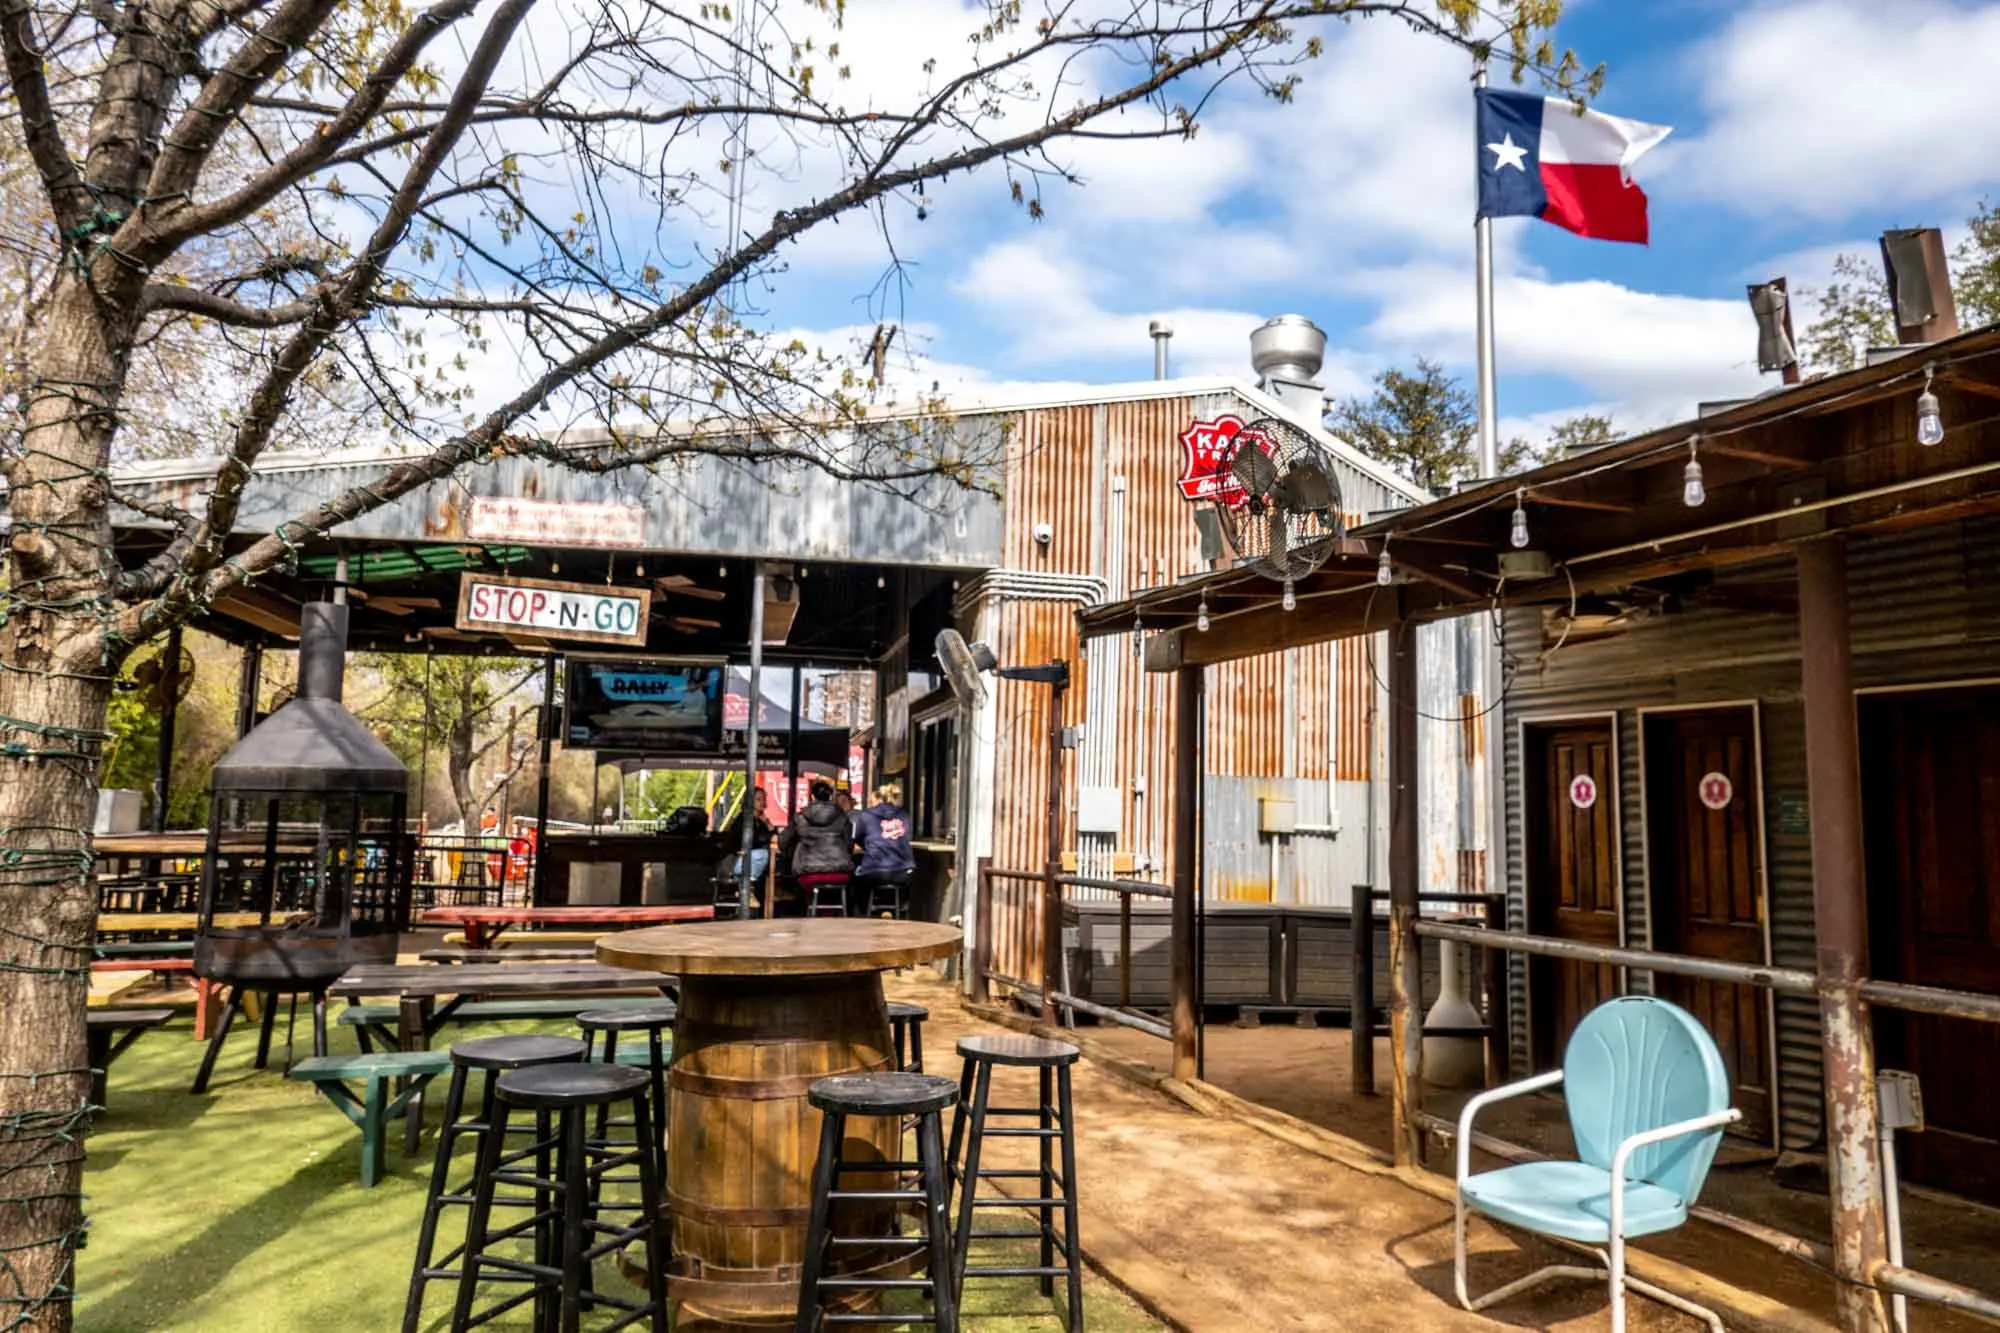 Outdoor seating at a beer garden and a Texas flag blowing in the wind.